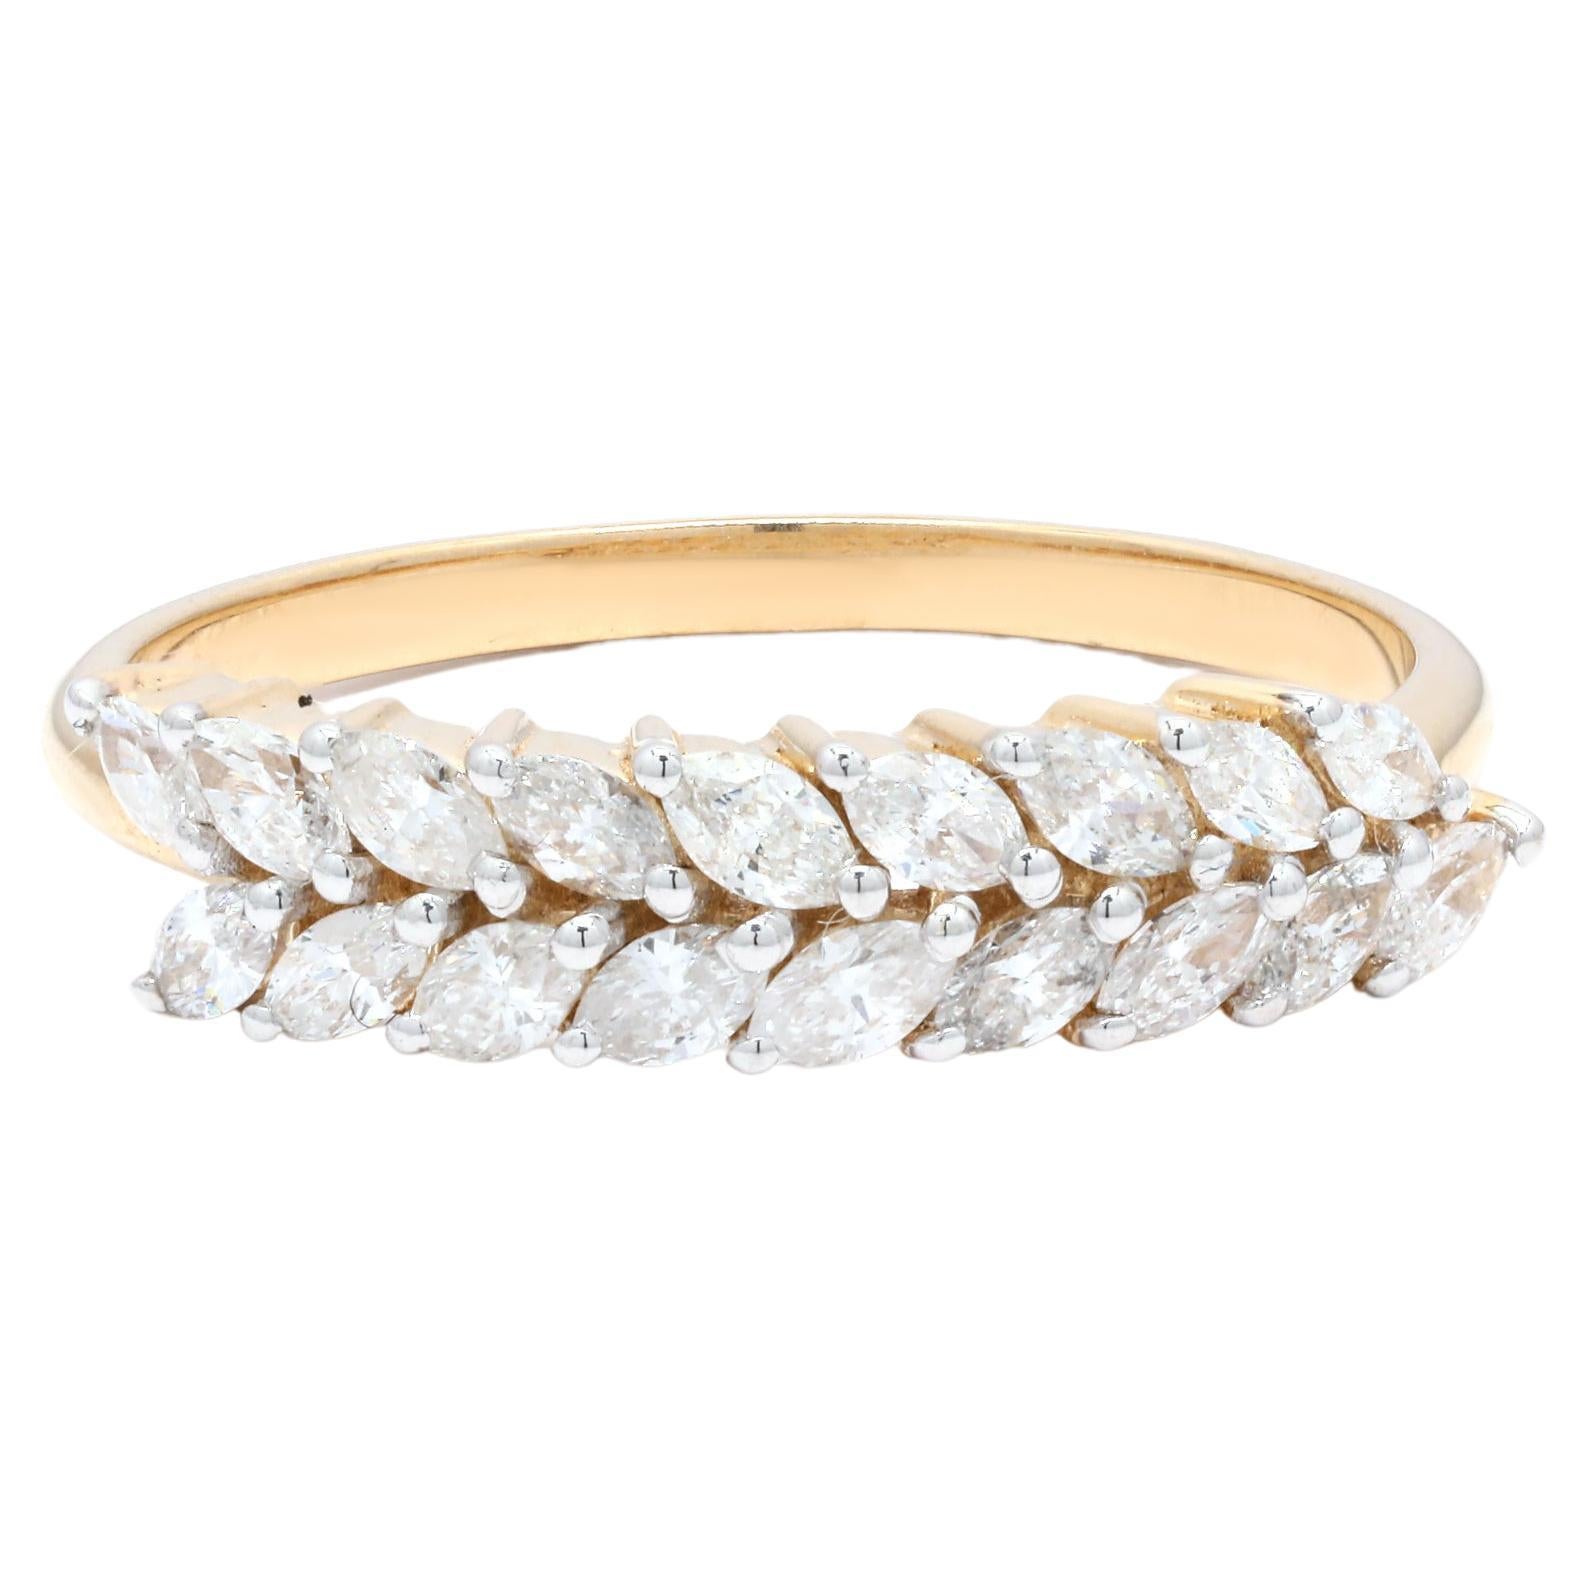 Marquise Cut Diamond Cluster Ring in 14K Yellow Gold, Diamond Engagement Ring